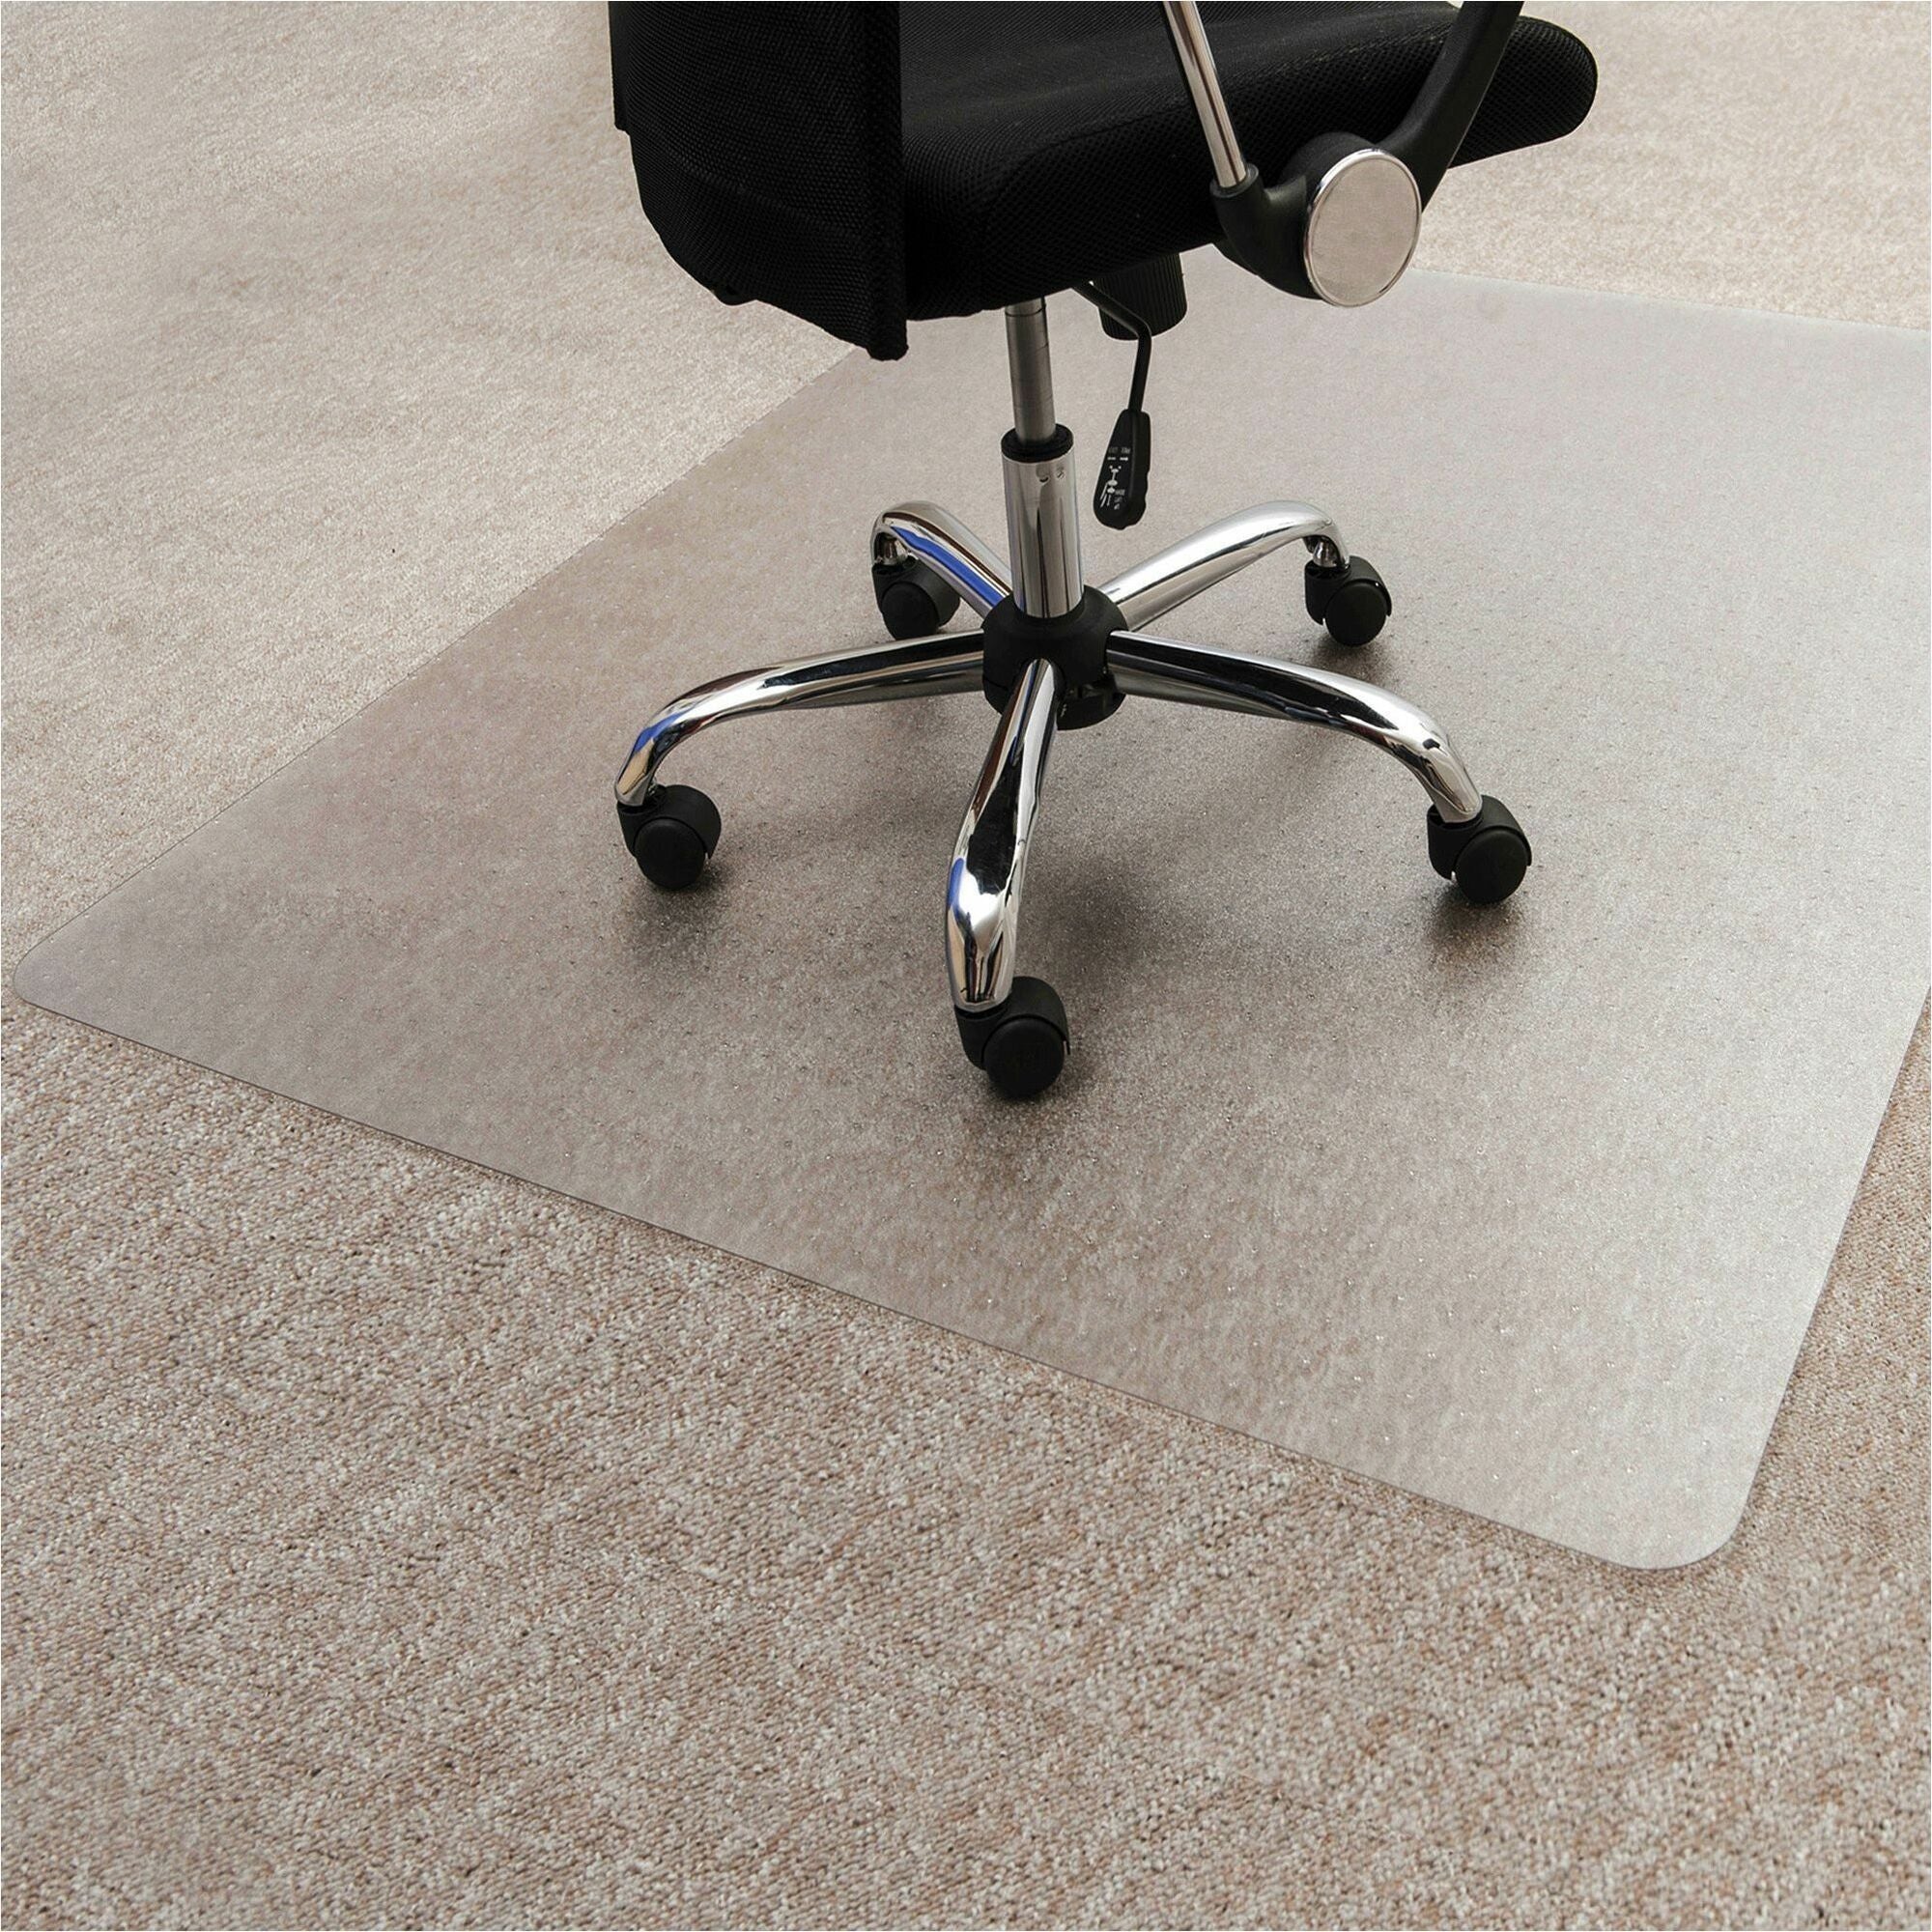 ecotex-enhanced-polymer-rectangular-chair-mat-for-carpets-up-to-3-8-36-x-48-home-office-carpet-48-length-x-36-width-x-0087-depth-x-0087-thickness-rectangular-polymer-clear-1each-taa-compliant_flreco113648ep - 1